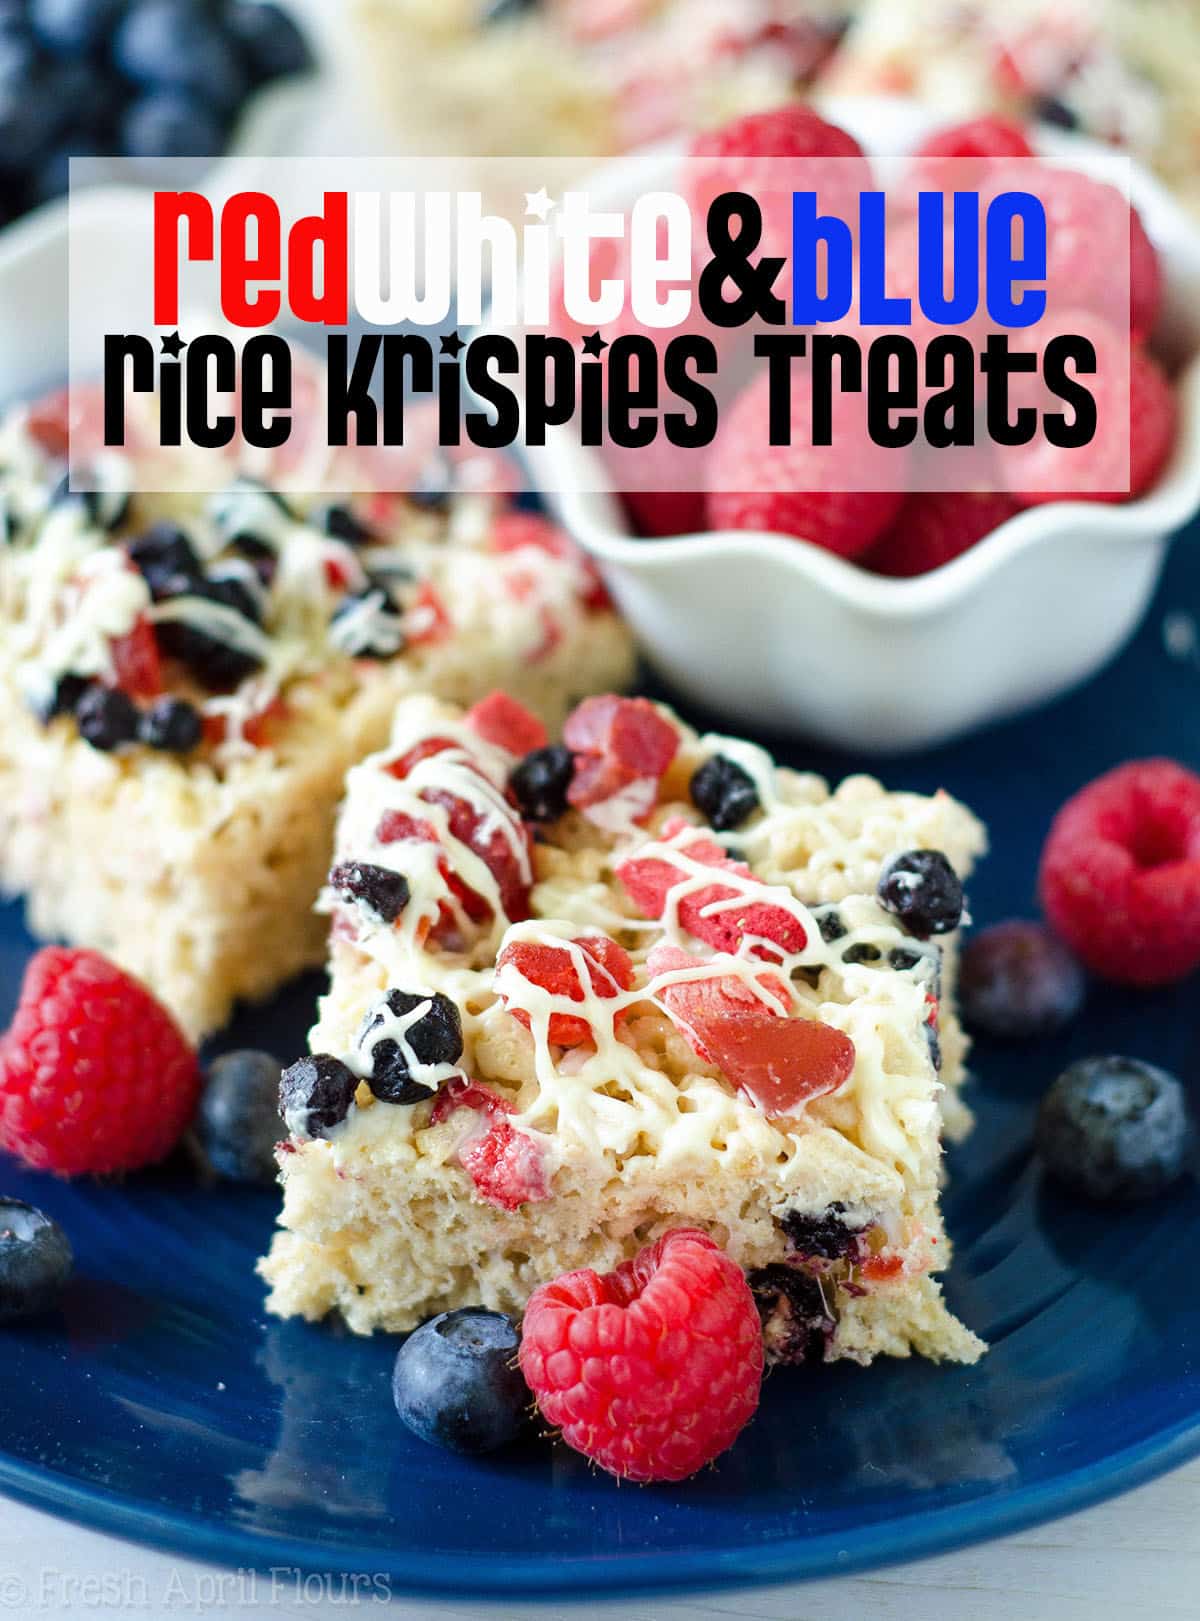 Red, White, & Blue Rice Krispies Treats: A patriotic twist on the classic featuring dried fruit and white chocolate-- use blueberries, strawberries, raspberries, and/or cherries for a berry version fit for any American celebration! via @frshaprilflours